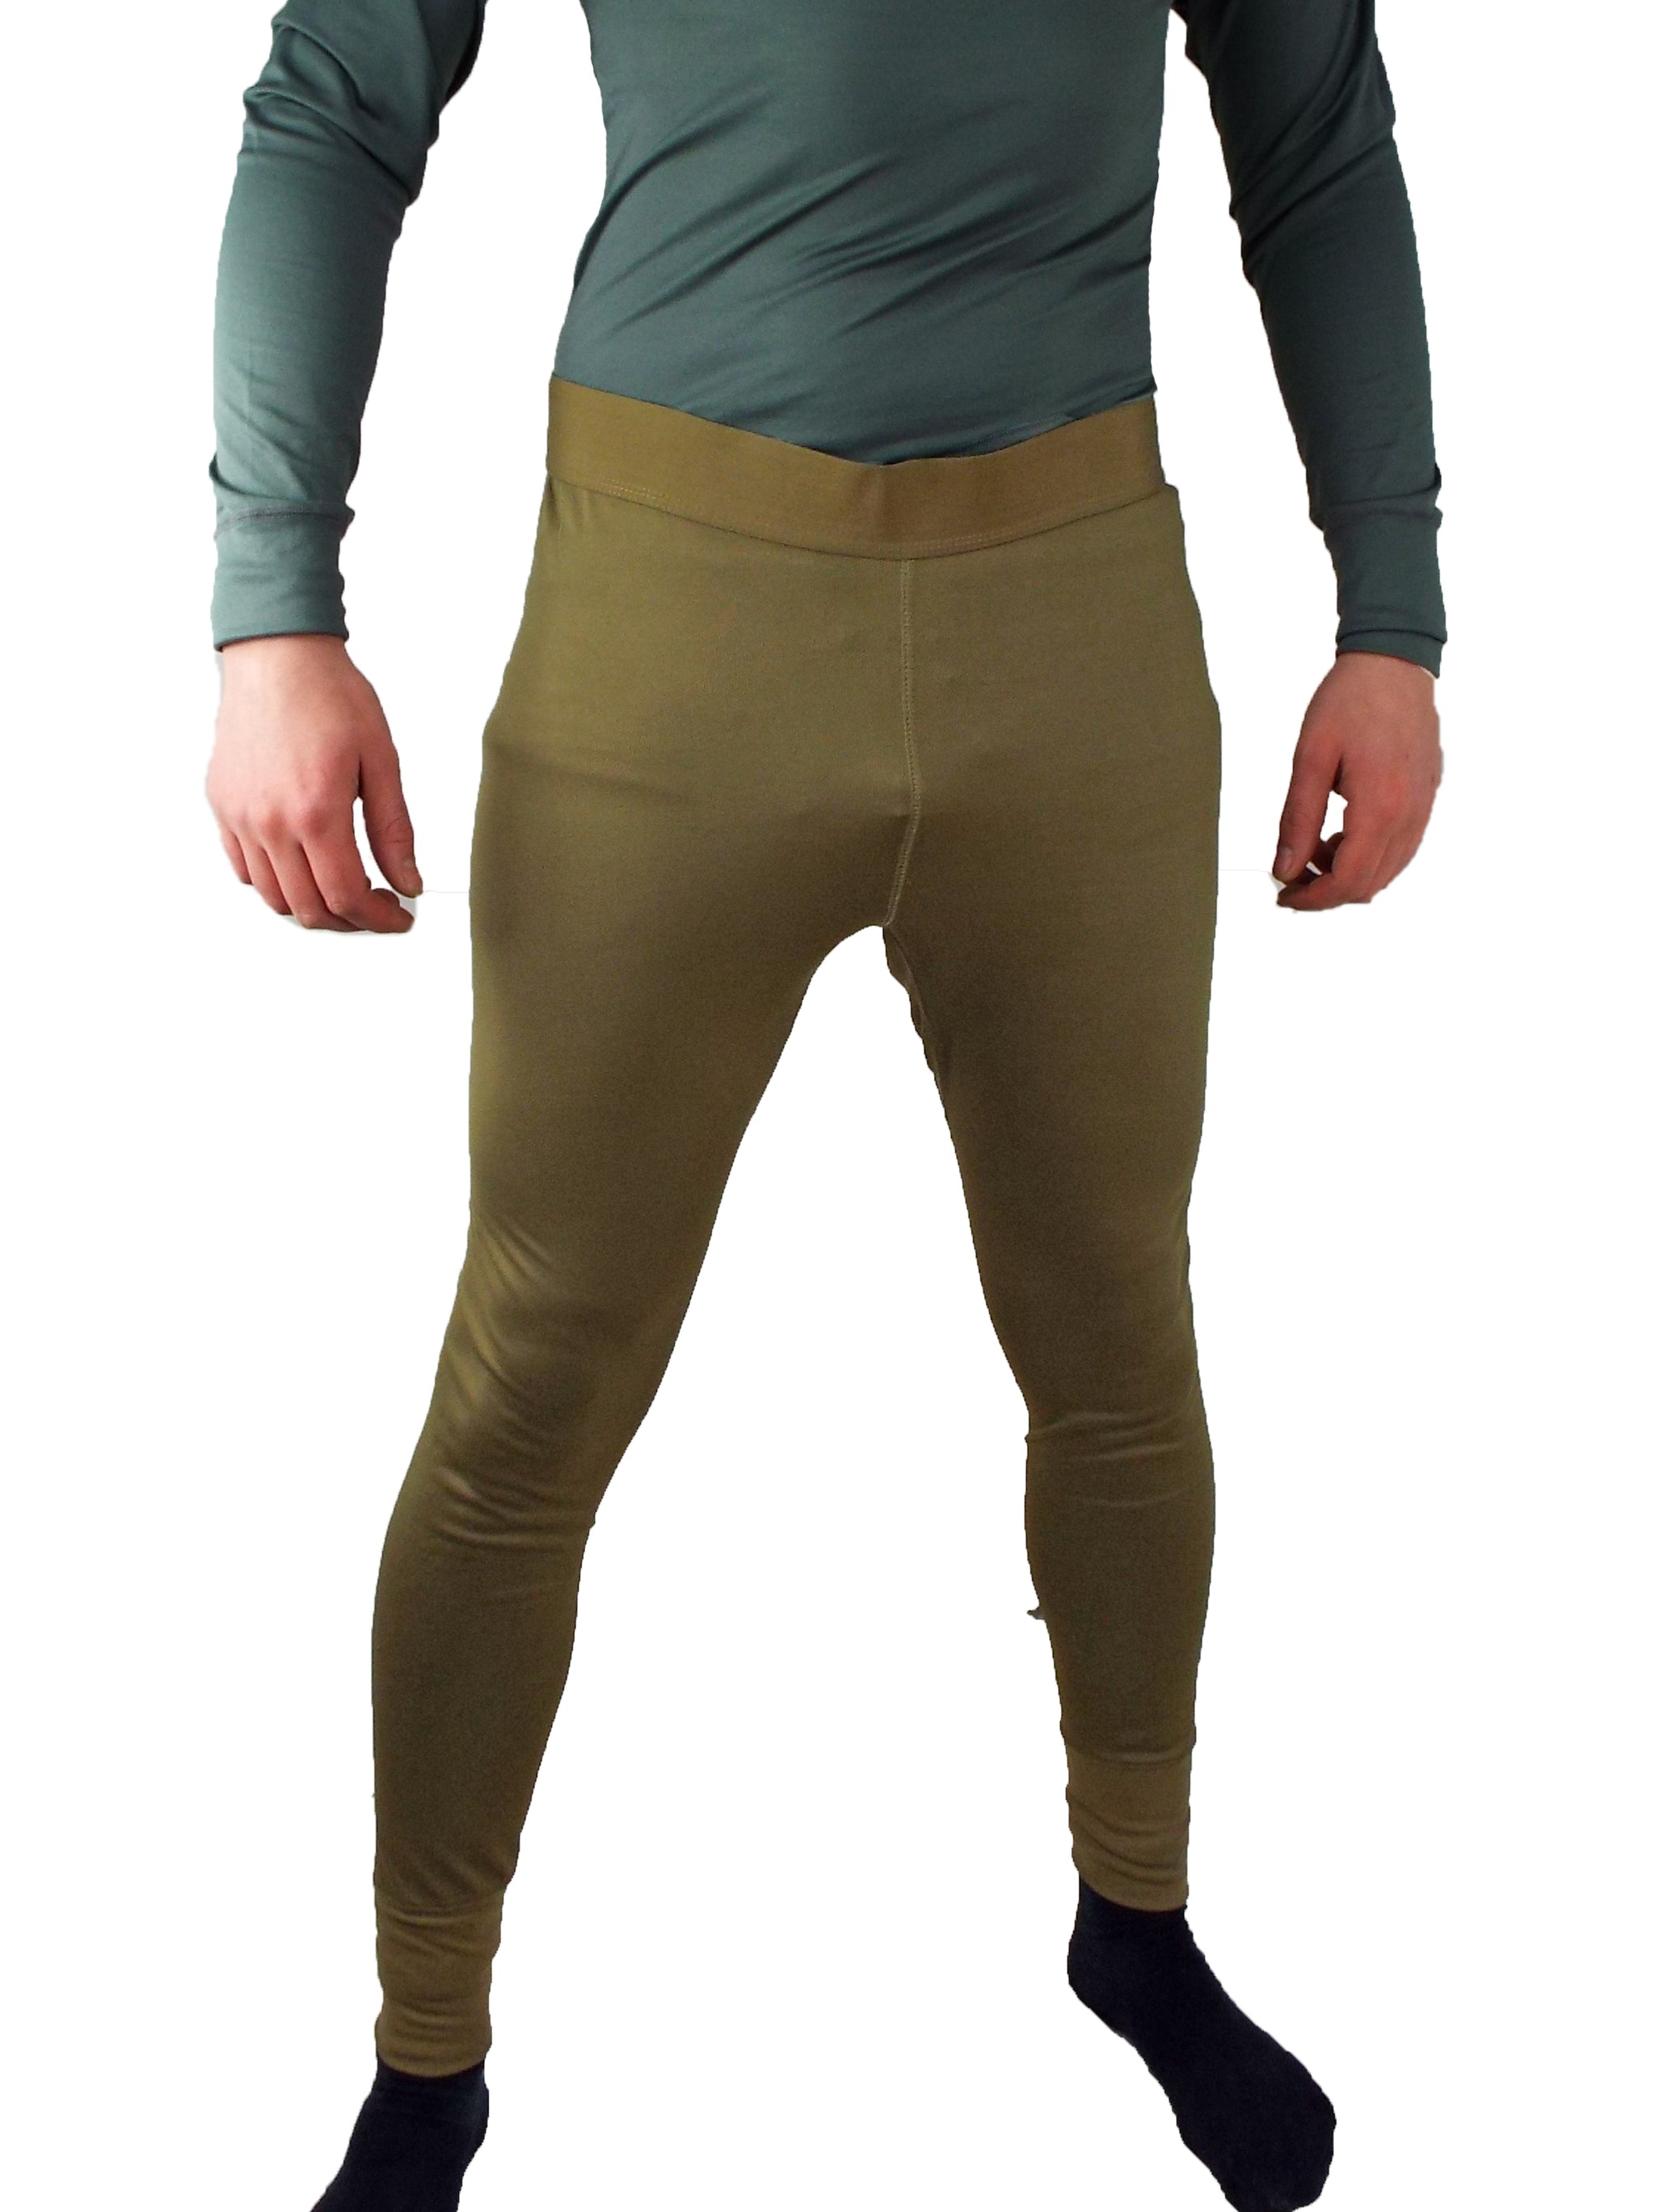 British Army - Olive Green Thermal Long-Johns - Grade 1 - Forces